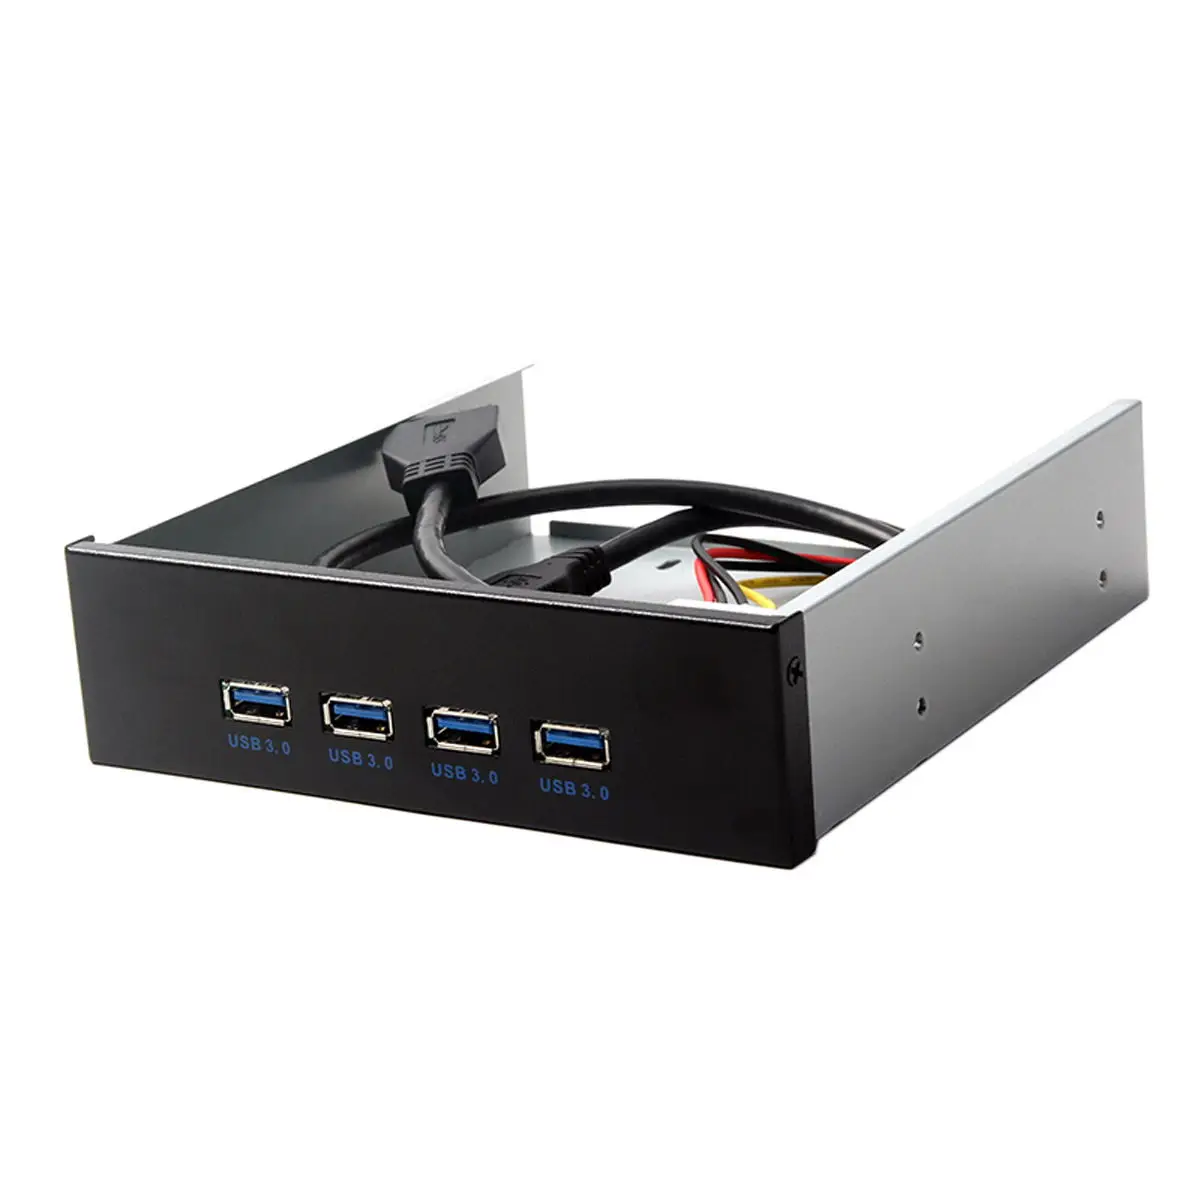 

USB 3.0 HUB 4 Ports Front Panel to Motherboard 20Pin Connector Cable for 5.25" CD-ROM Bay